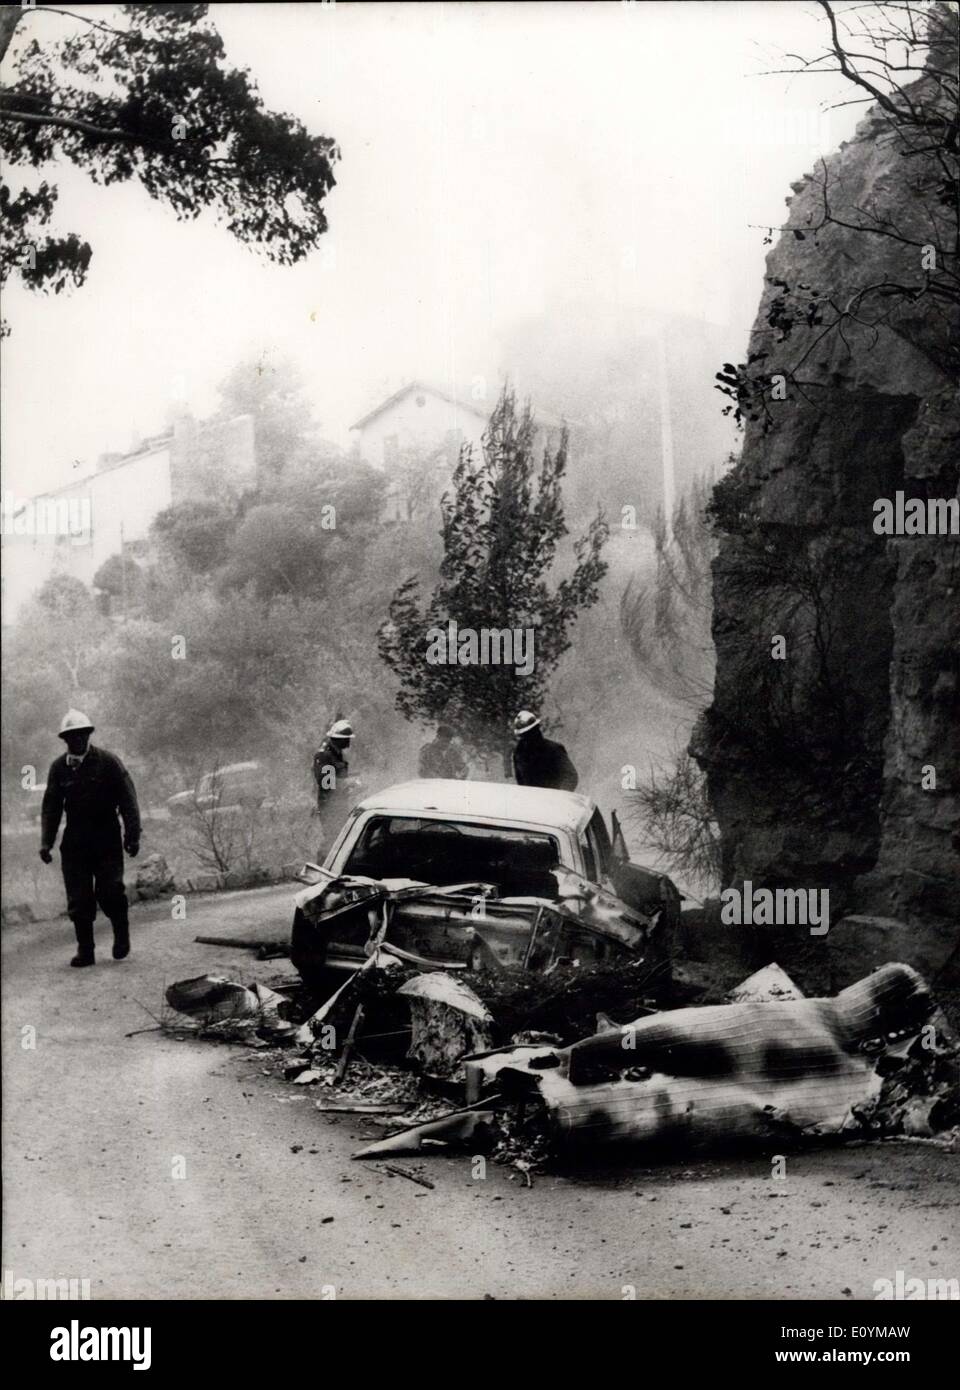 Oct. 05, 1970 - Forest fire in Southern France.: Forest fire in Southern France near Toulon reached its climax lately. Photo shows Firemen fighting the flames. Stock Photo